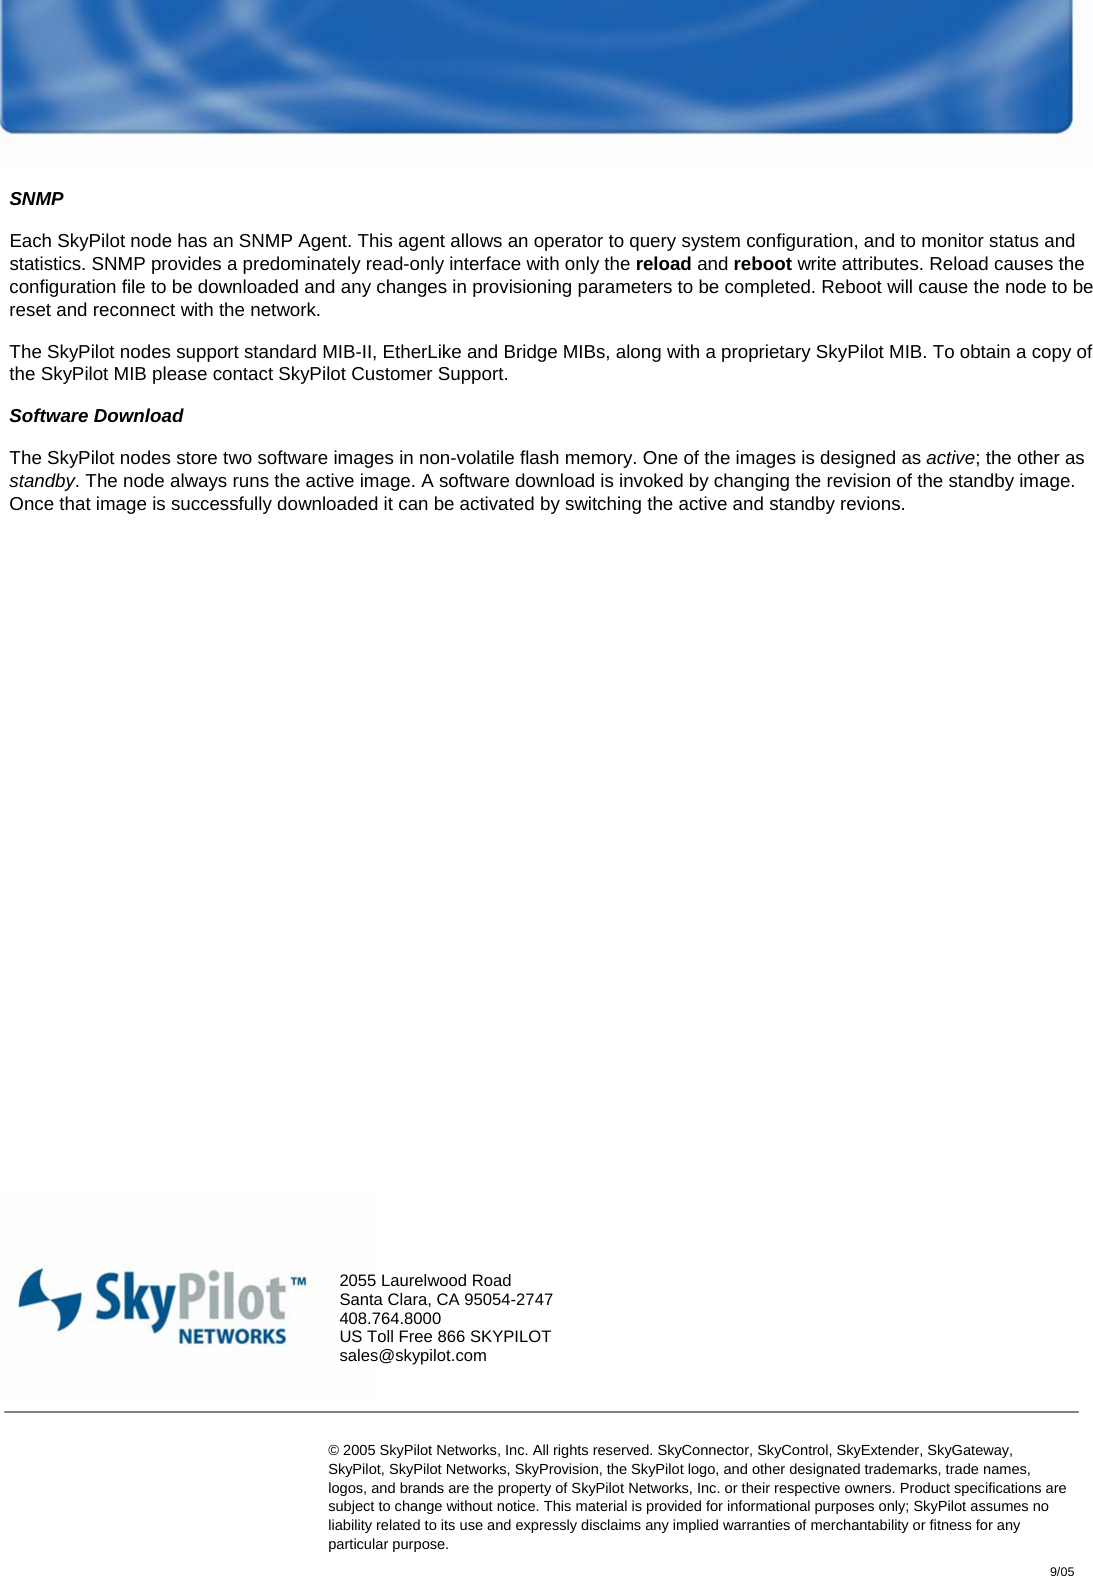  System Architecture and Protocol Guide – 9-05  17  © 2005 SkyPilot Networks, Inc. SNMP Each SkyPilot node has an SNMP Agent. This agent allows an operator to query system configuration, and to monitor status and statistics. SNMP provides a predominately read-only interface with only the reload and reboot write attributes. Reload causes the configuration file to be downloaded and any changes in provisioning parameters to be completed. Reboot will cause the node to be reset and reconnect with the network.  The SkyPilot nodes support standard MIB-II, EtherLike and Bridge MIBs, along with a proprietary SkyPilot MIB. To obtain a copy of the SkyPilot MIB please contact SkyPilot Customer Support.  Software Download The SkyPilot nodes store two software images in non-volatile flash memory. One of the images is designed as active; the other as standby. The node always runs the active image. A software download is invoked by changing the revision of the standby image. Once that image is successfully downloaded it can be activated by switching the active and standby revions. © 2005 SkyPilot Networks, Inc. All rights reserved. SkyConnector, SkyControl, SkyExtender, SkyGateway, SkyPilot, SkyPilot Networks, SkyProvision, the SkyPilot logo, and other designated trademarks, trade names, logos, and brands are the property of SkyPilot Networks, Inc. or their respective owners. Product speciﬁcations are subject to change without notice. This material is provided for informational purposes only; SkyPilot assumes no liability related to its use and expressly disclaims any implied warranties of merchantability or ﬁtness for any particular purpose.  2055 Laurelwood Road Santa Clara, CA 95054-2747 408.764.8000 US Toll Free 866 SKYPILOT sales@skypilot.com   9/05 